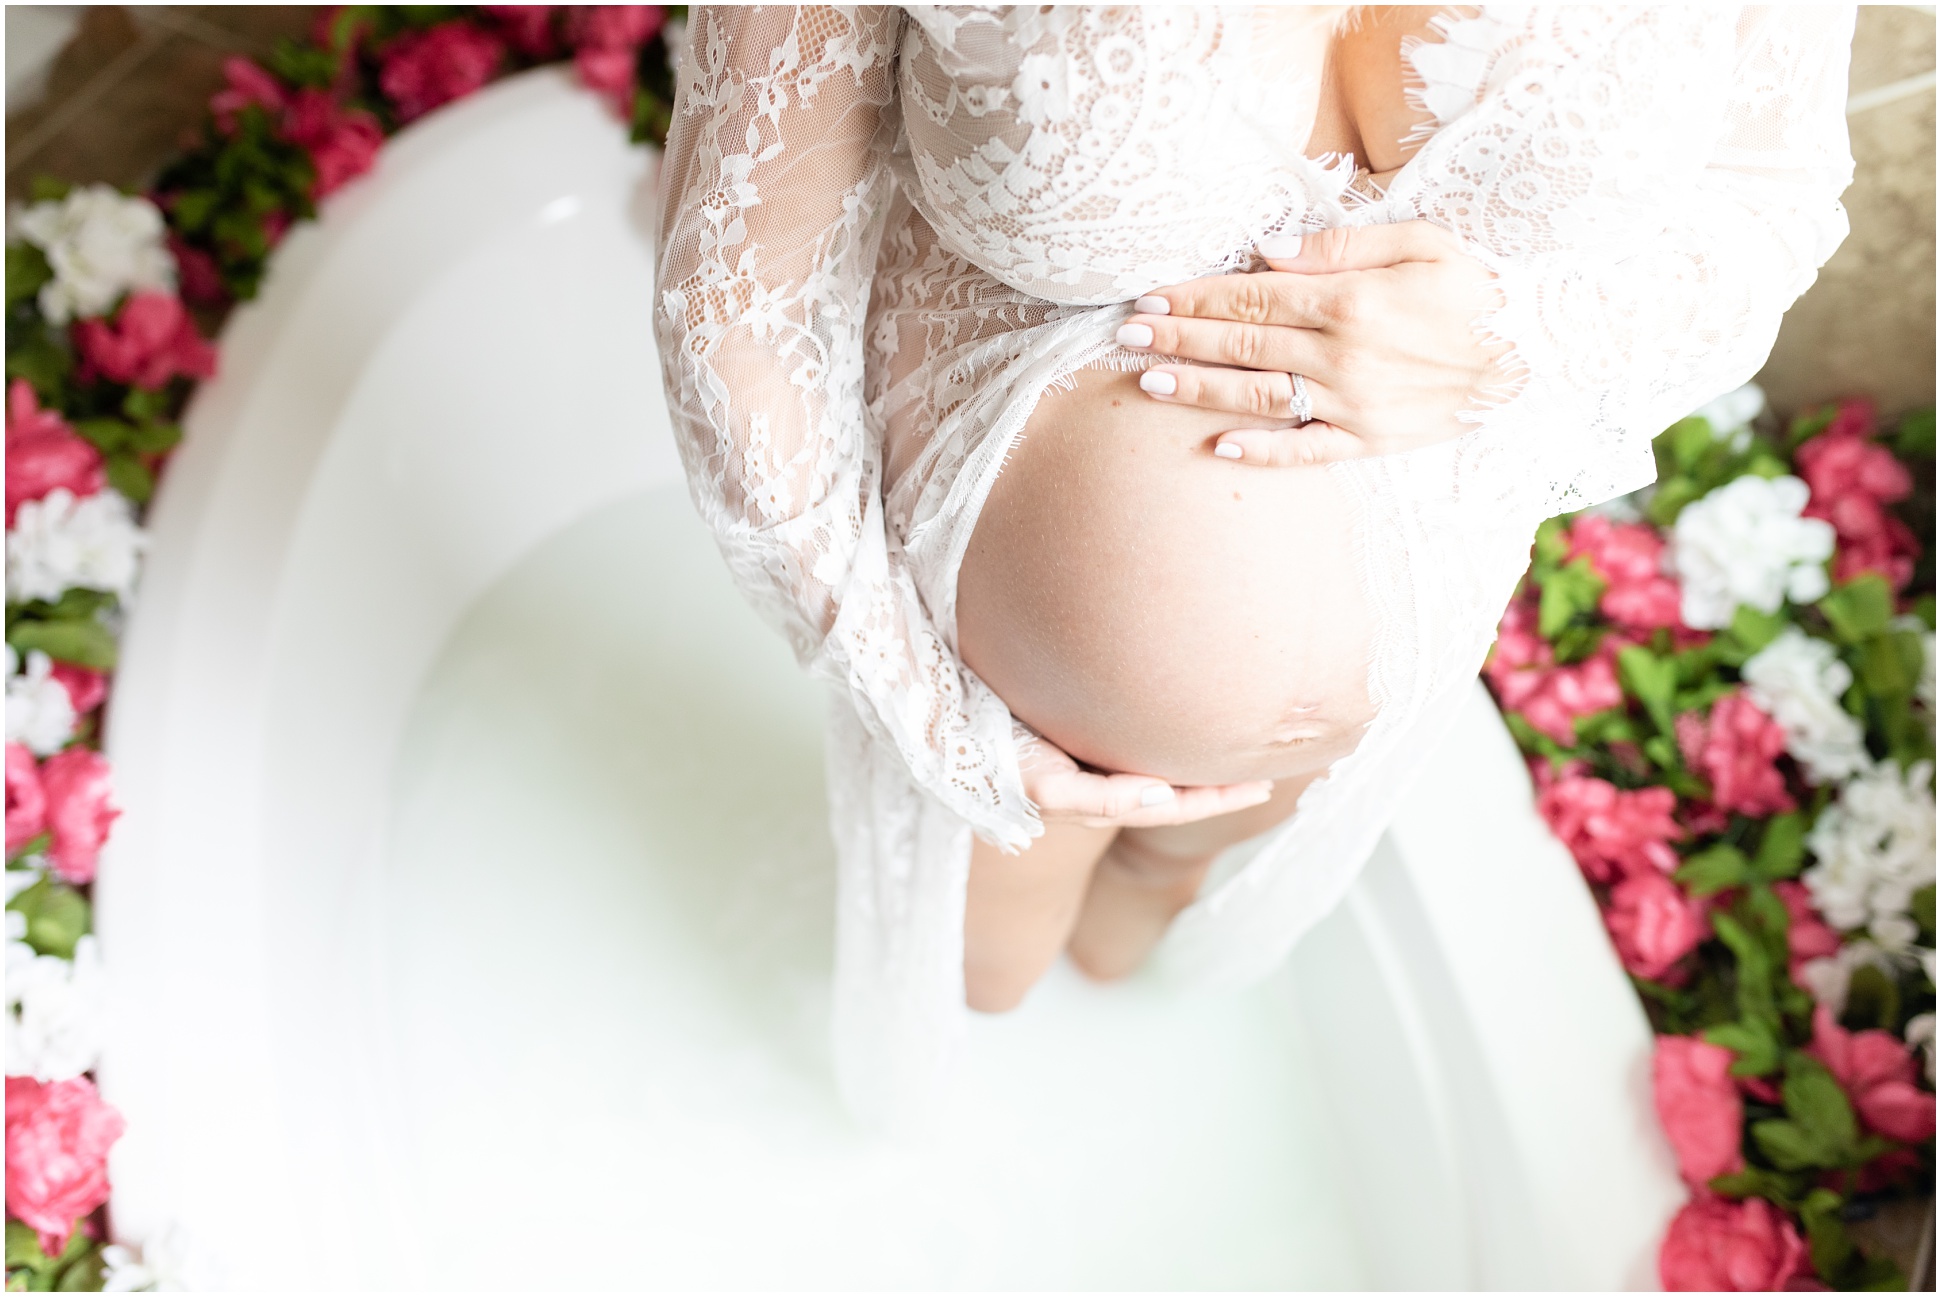 Pregnant women standing in milk bath with a lace dress and her baby bump exposed